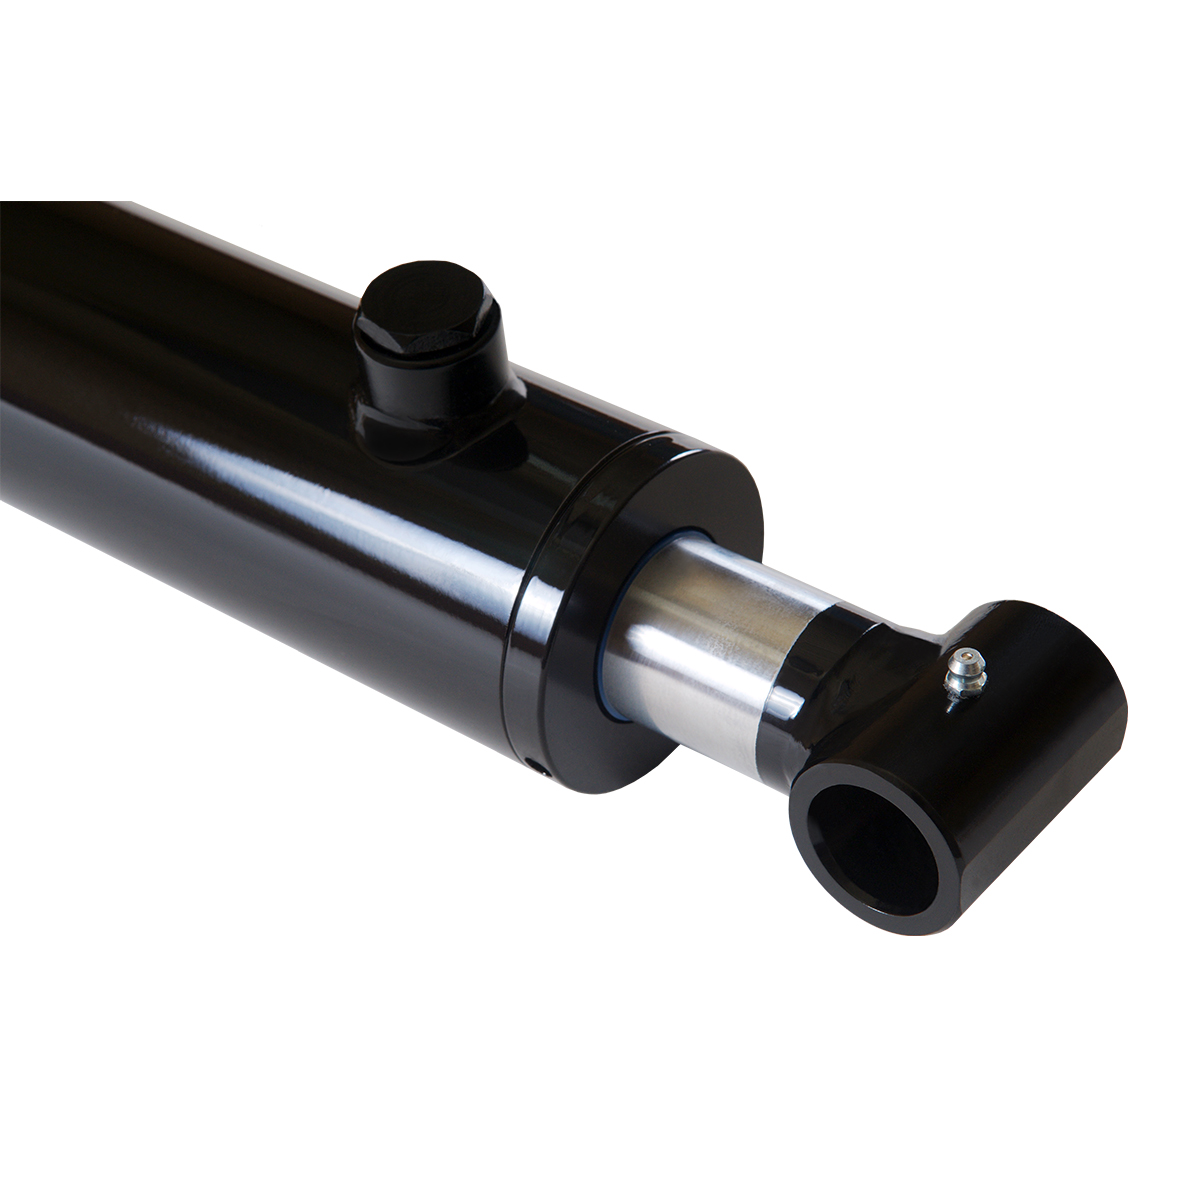 2.5 bore x 22 stroke hydraulic cylinder, welded cross tube double acting cylinder | Magister Hydraulics